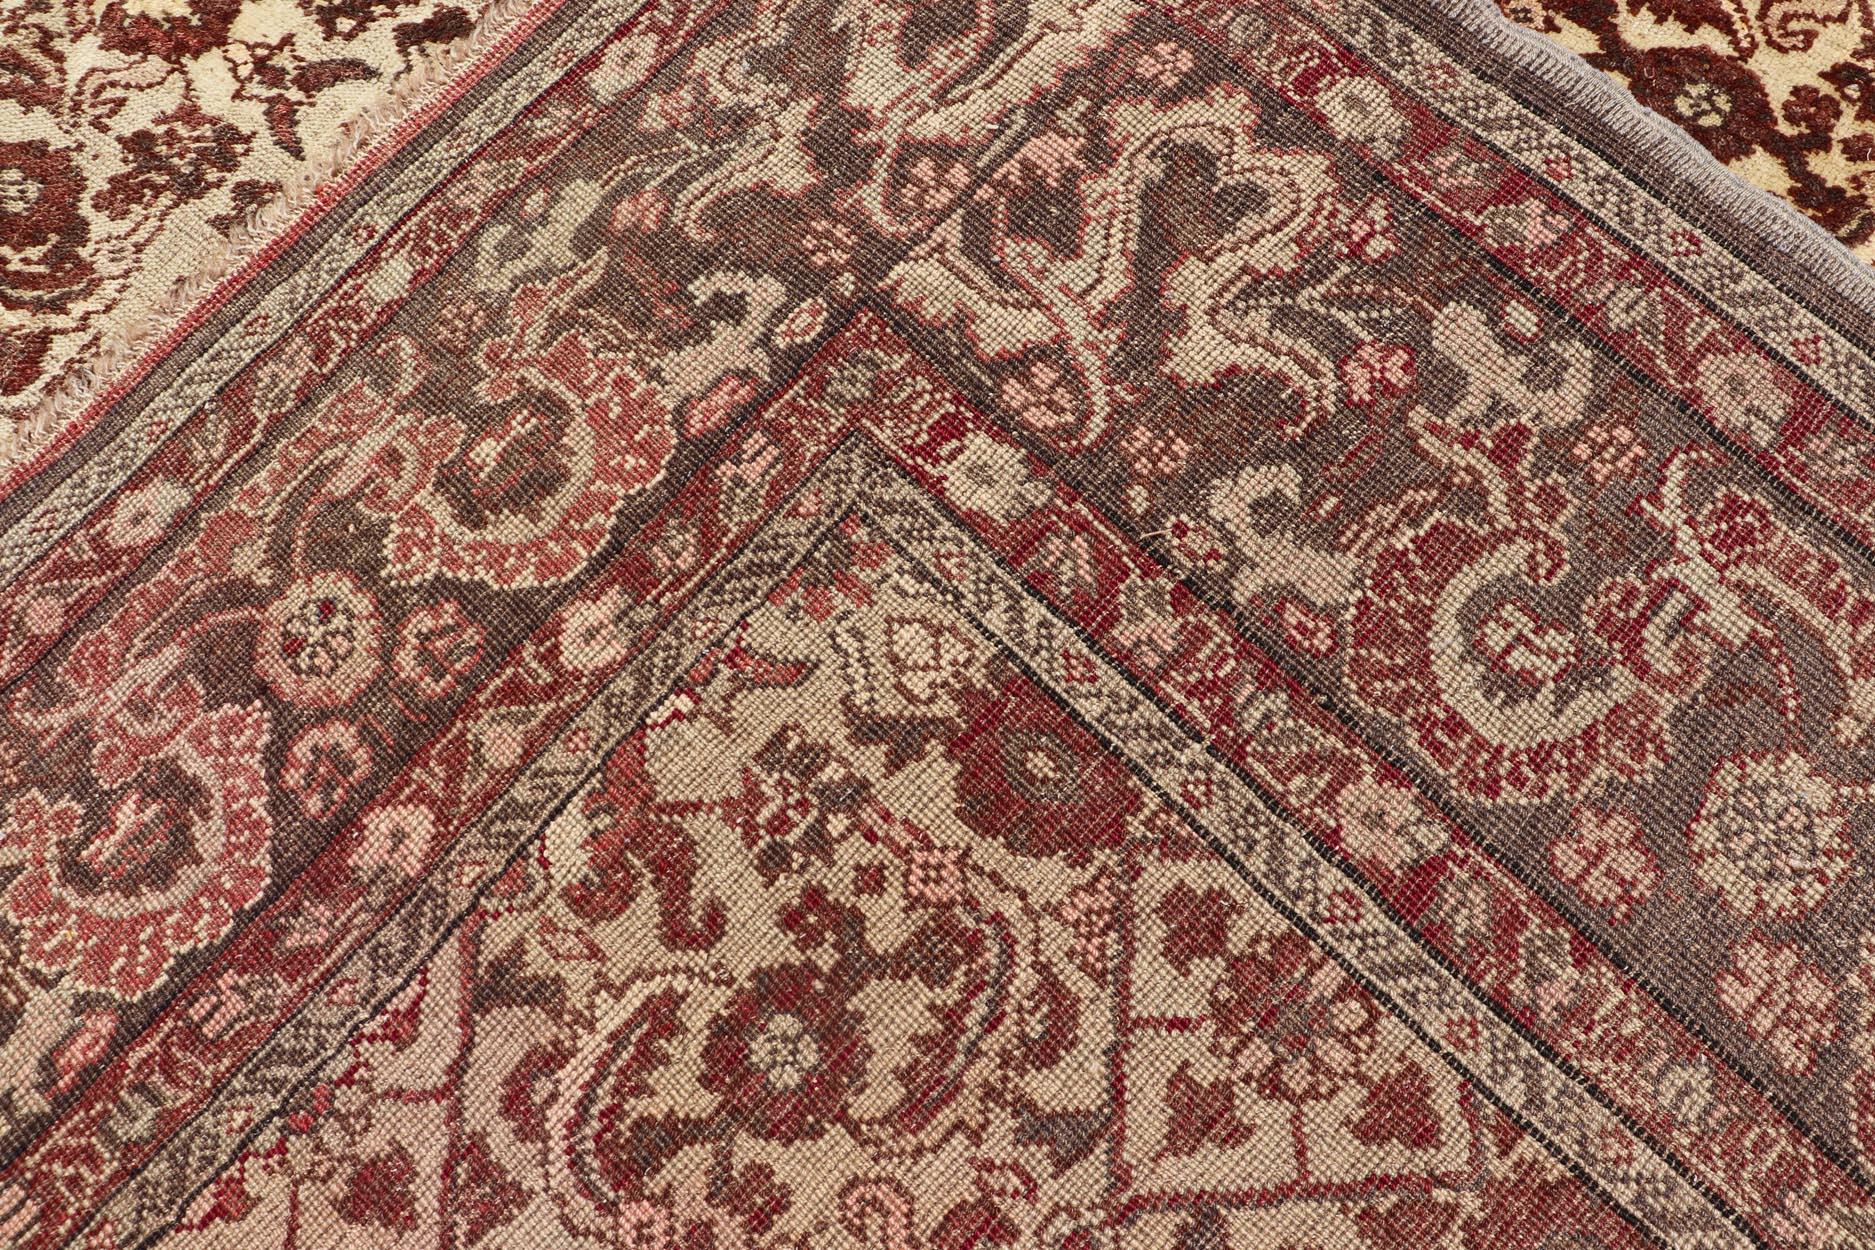 Antique Turkish Sivas Rug with Tan Background and Maroon, Eggplant, Brown Color  For Sale 8